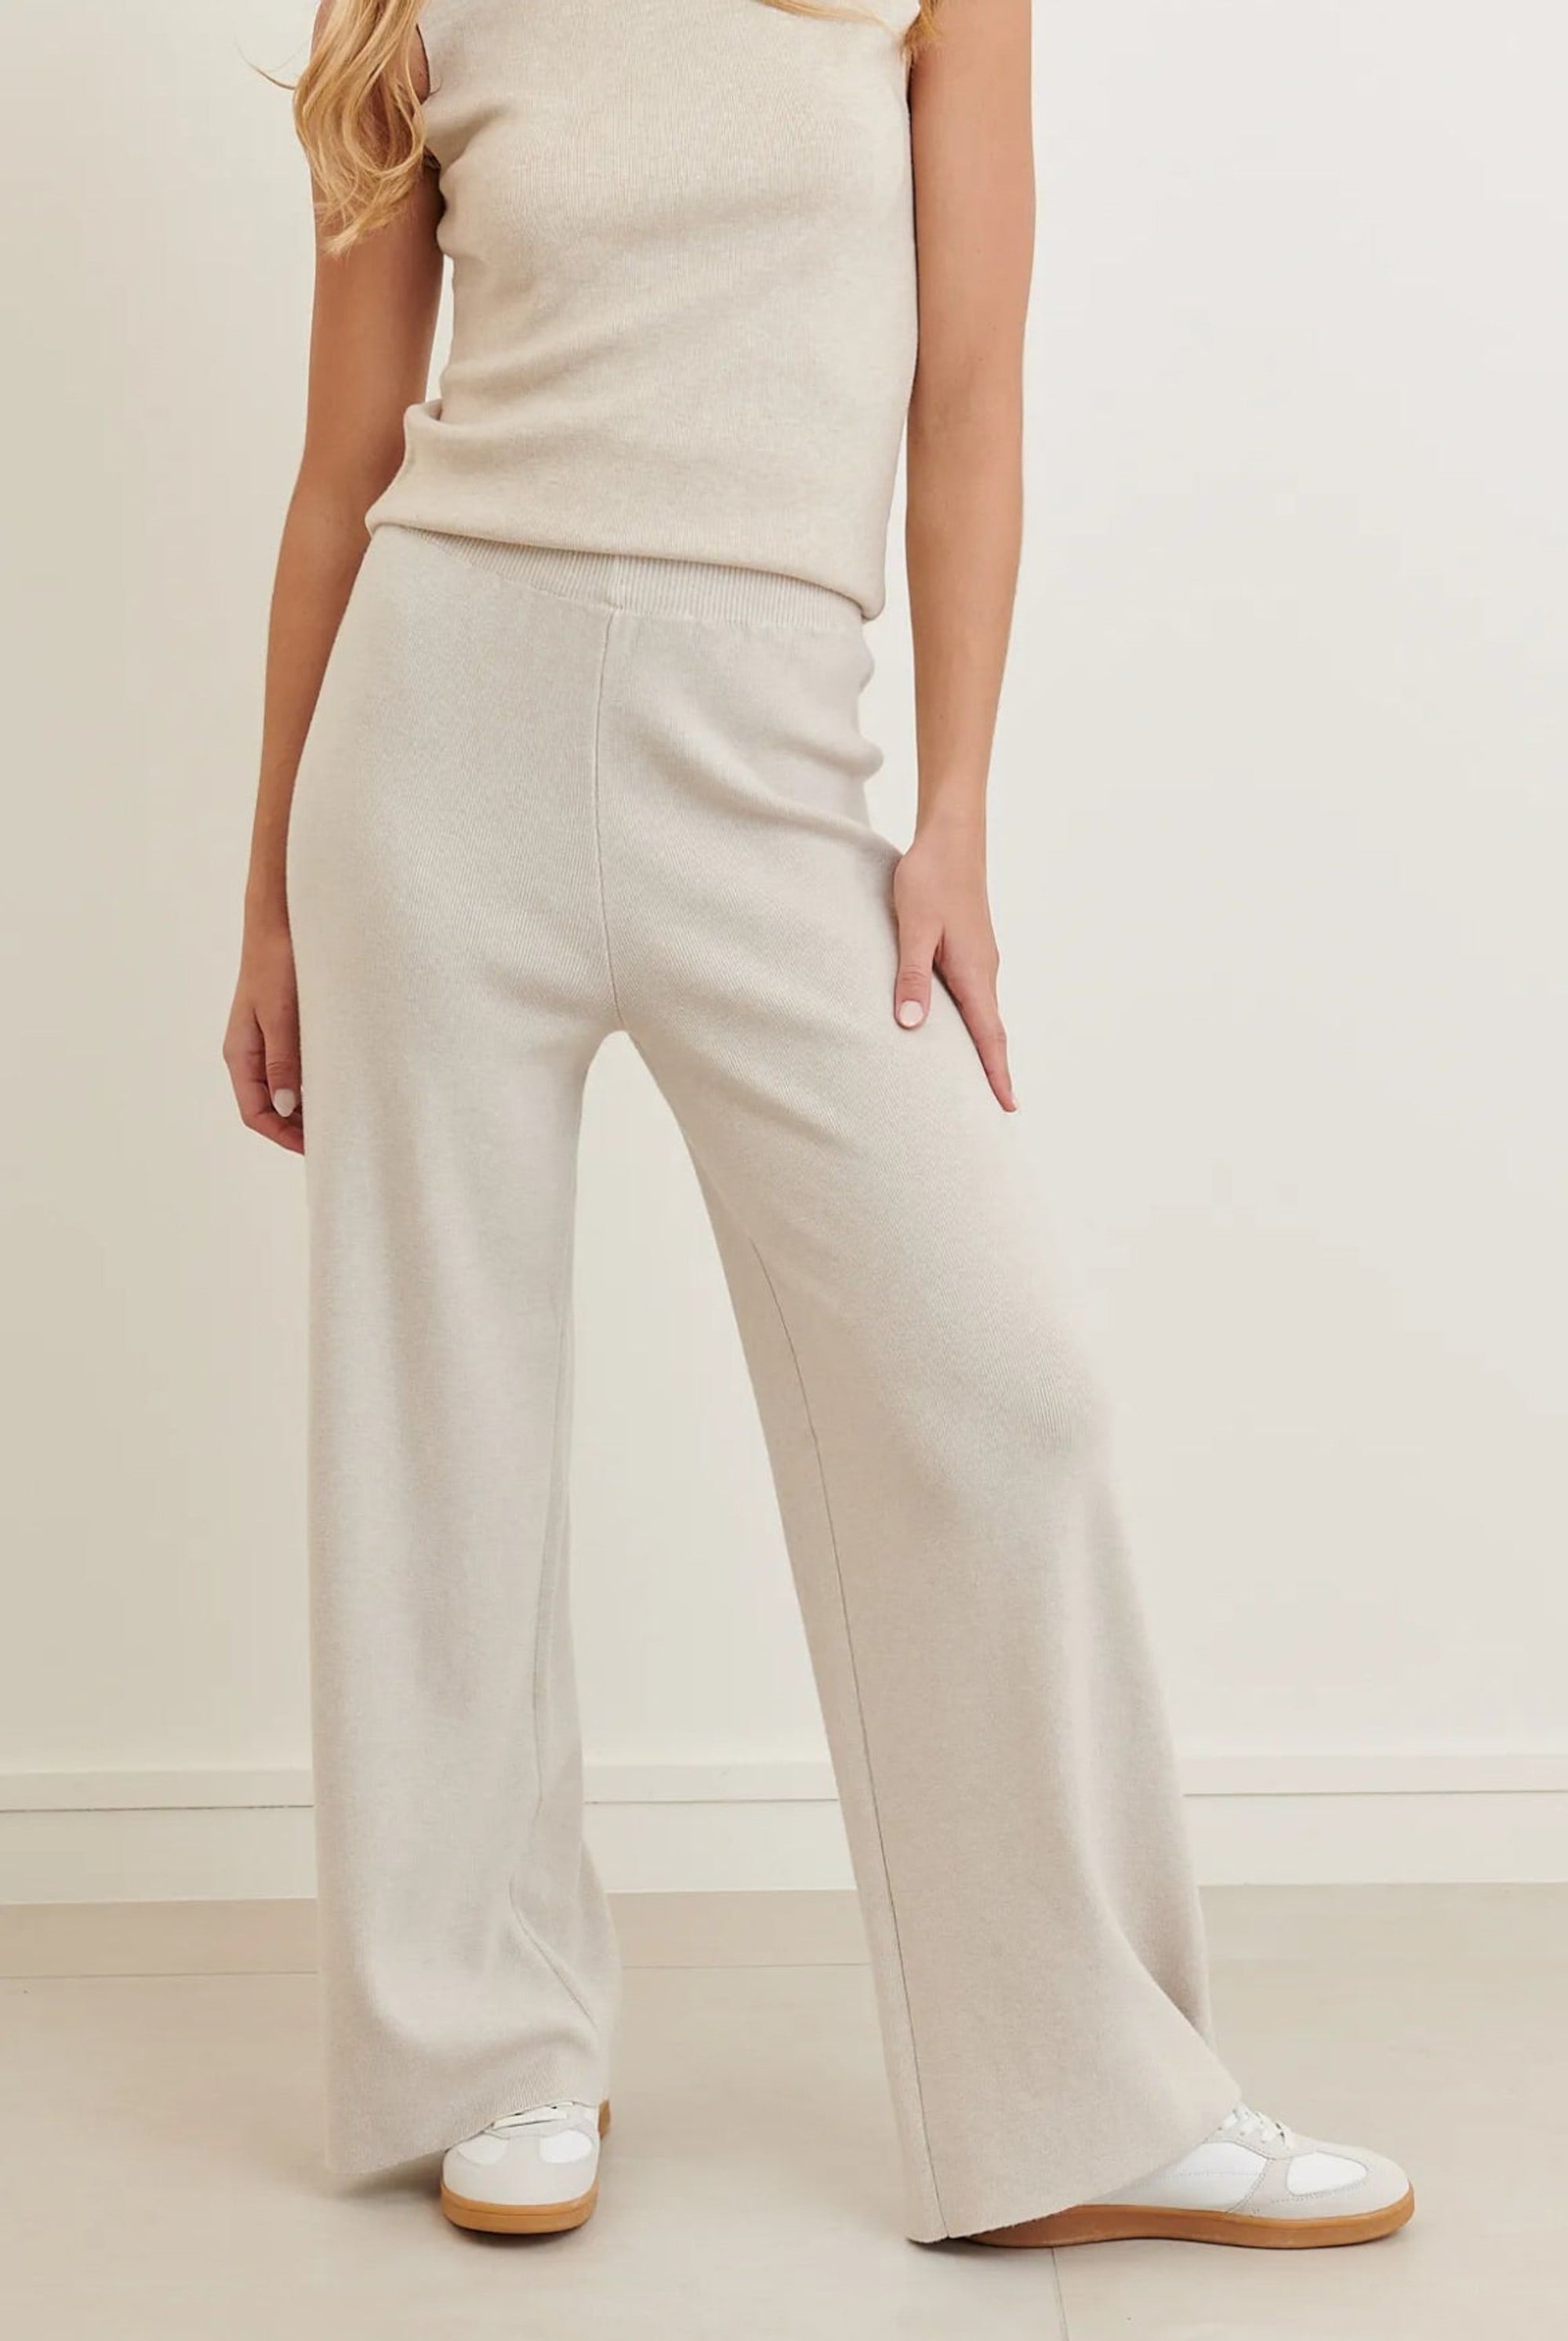 Clever Alice French Knit Pant - clever alice